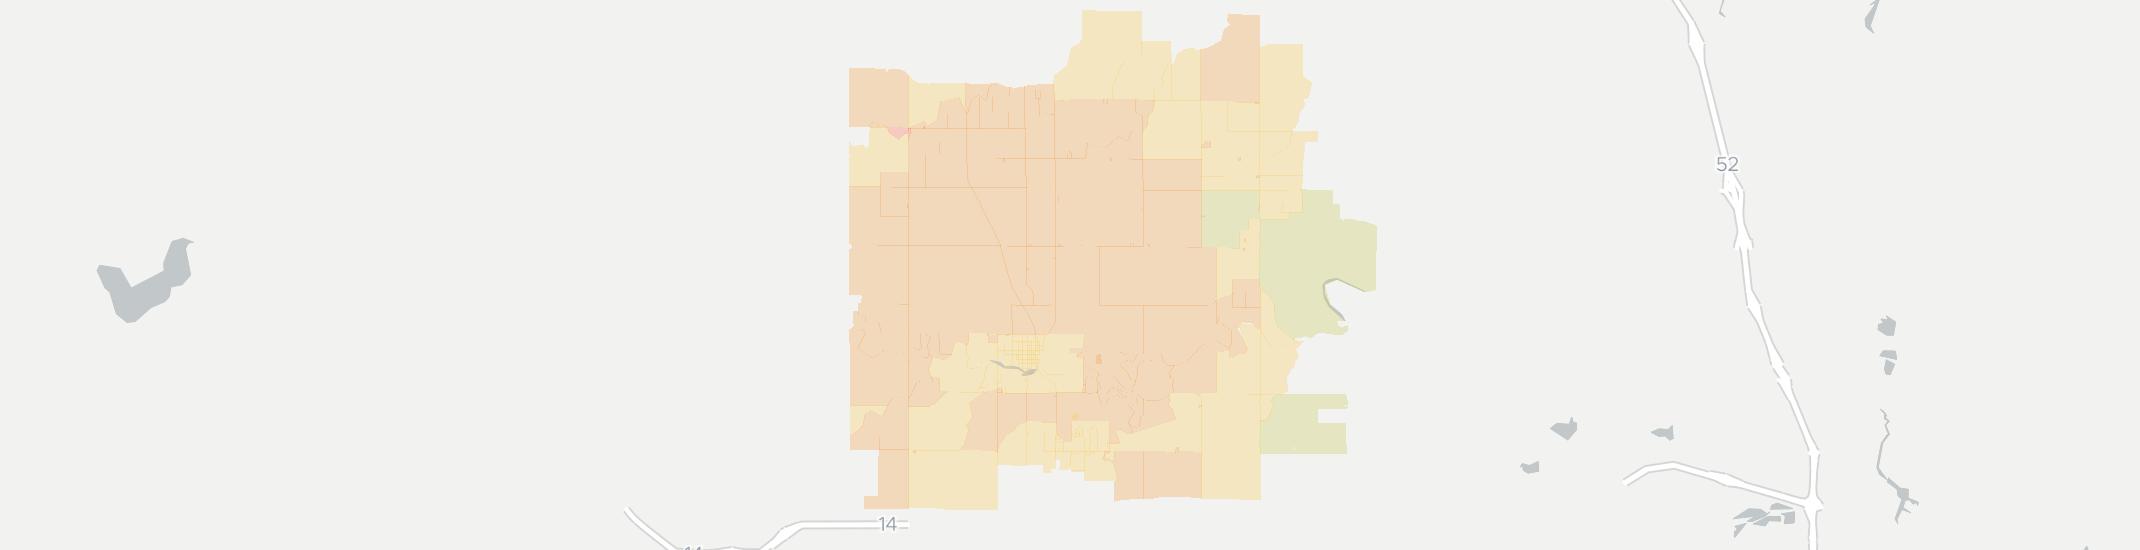 Mantorville Internet Competition Map. Click for interactive map.